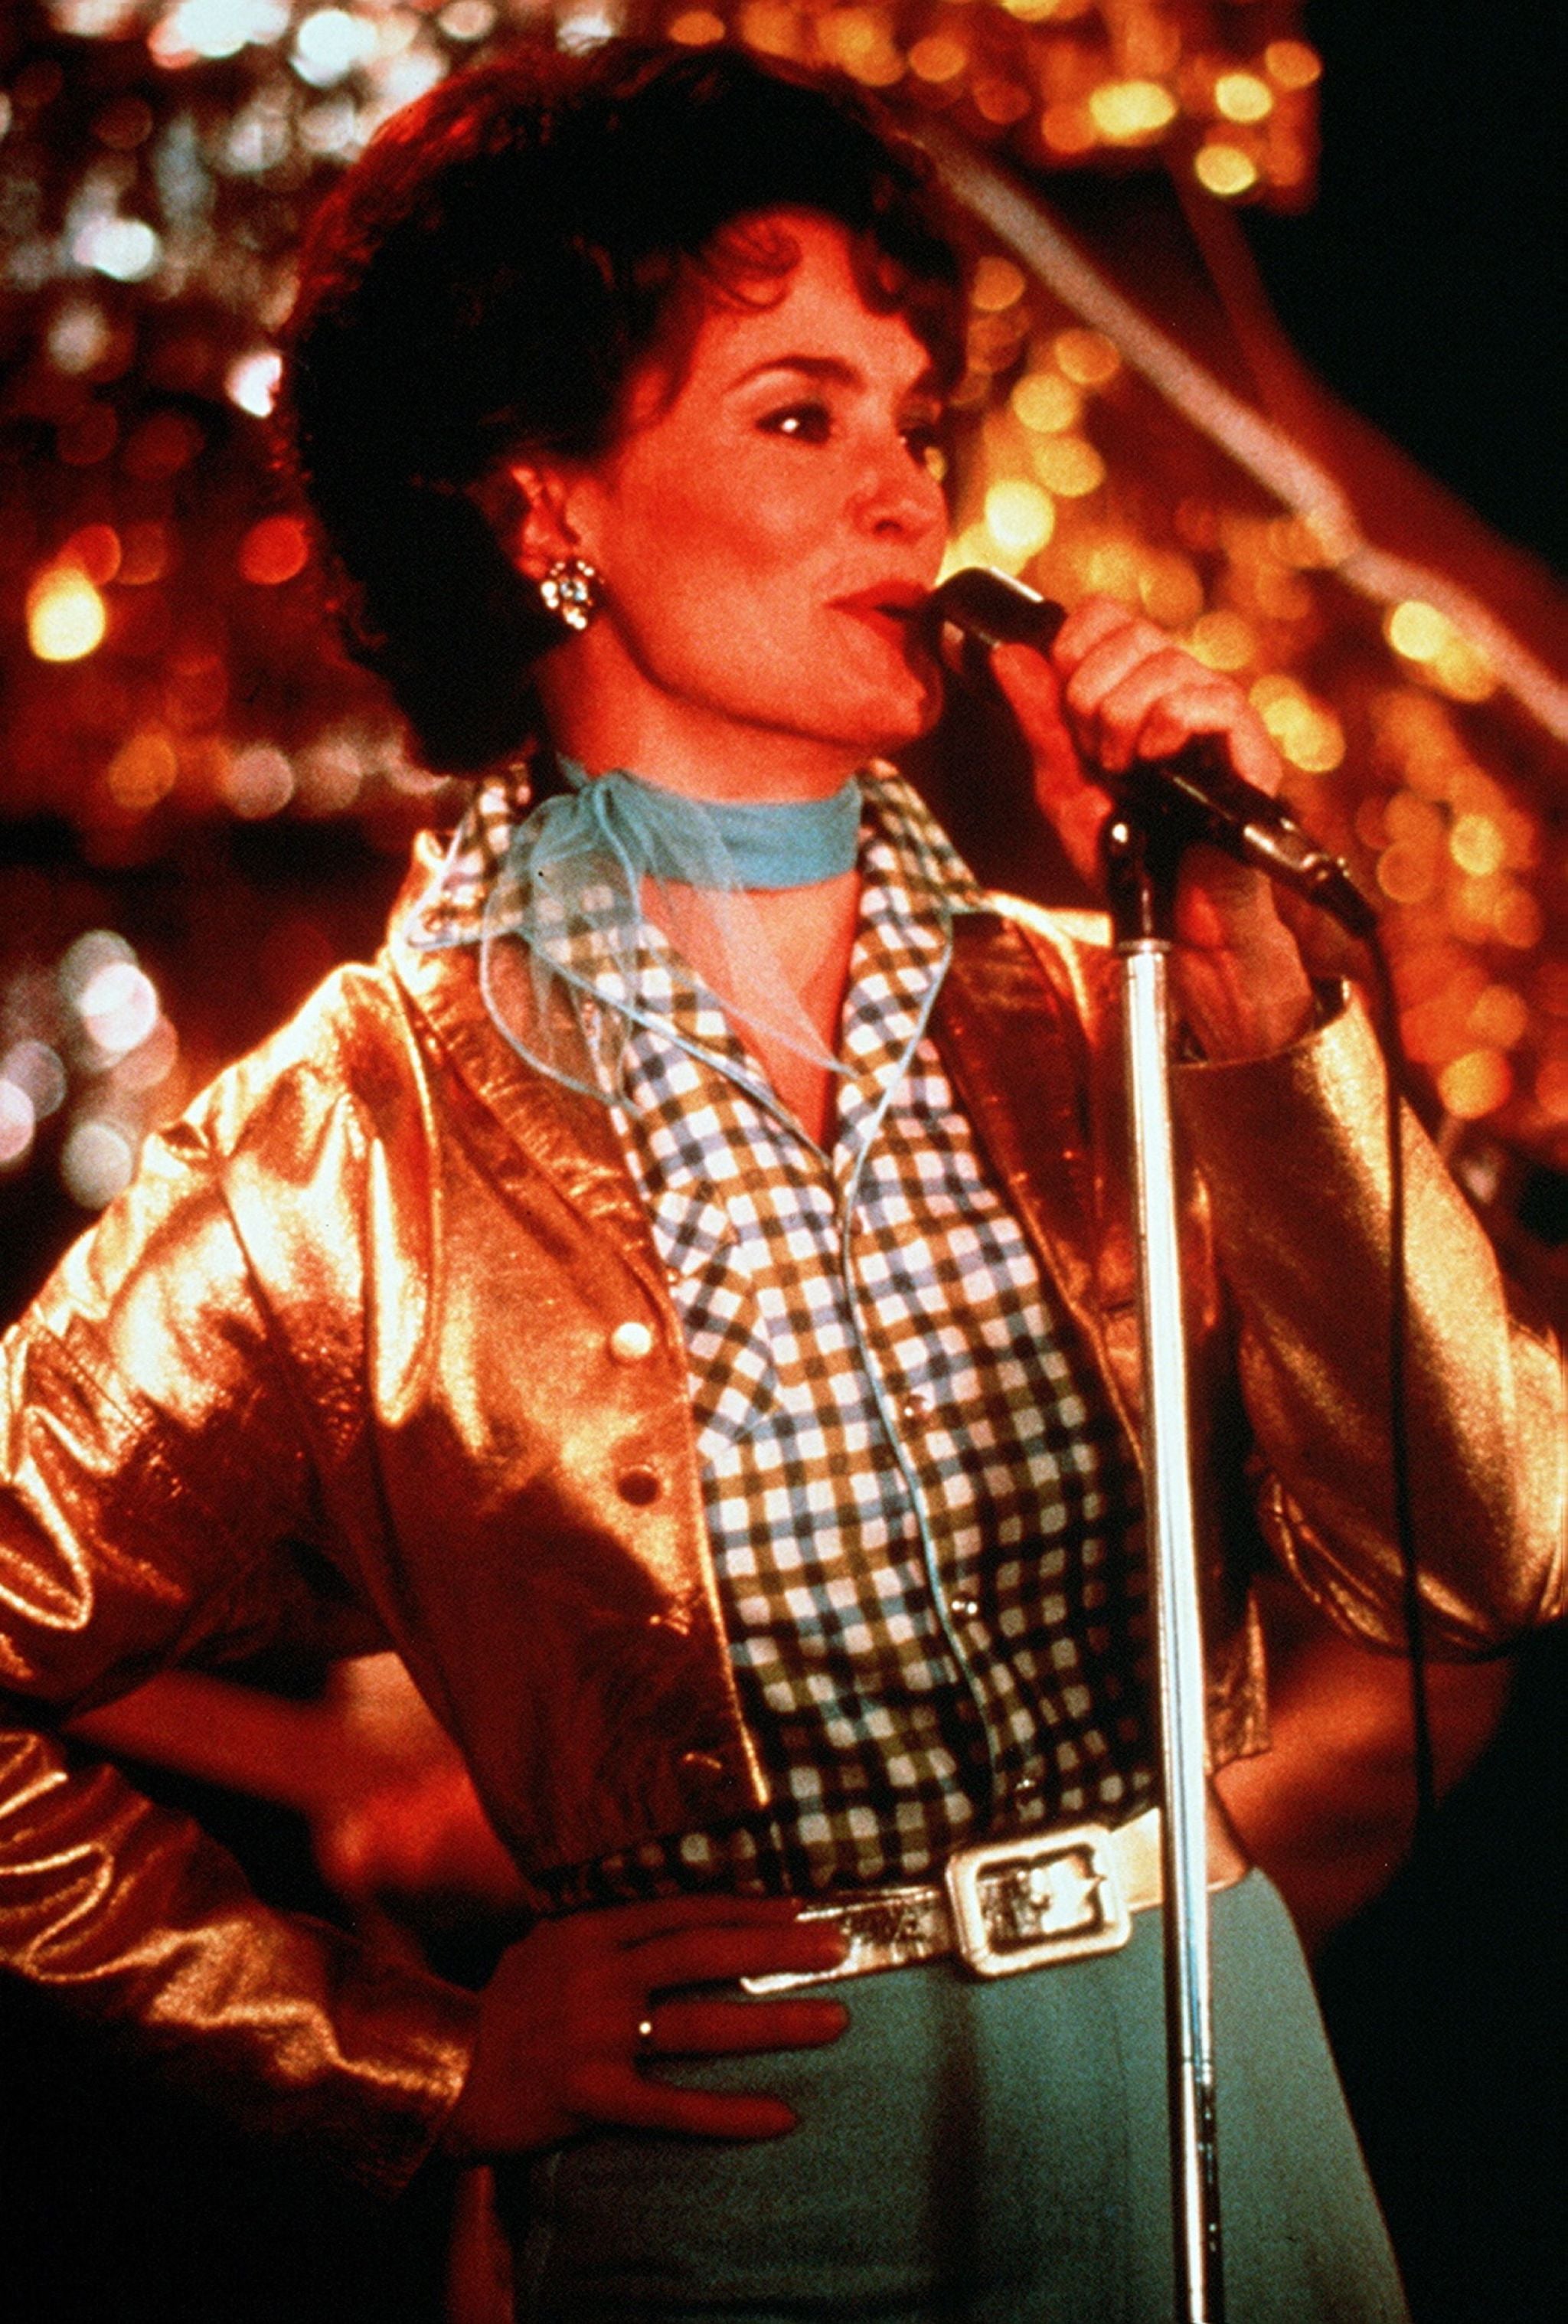 Jessica Lange won an Academy Award for her role as Patsy Cline in the 1985 film ‘Sweet Dreams’